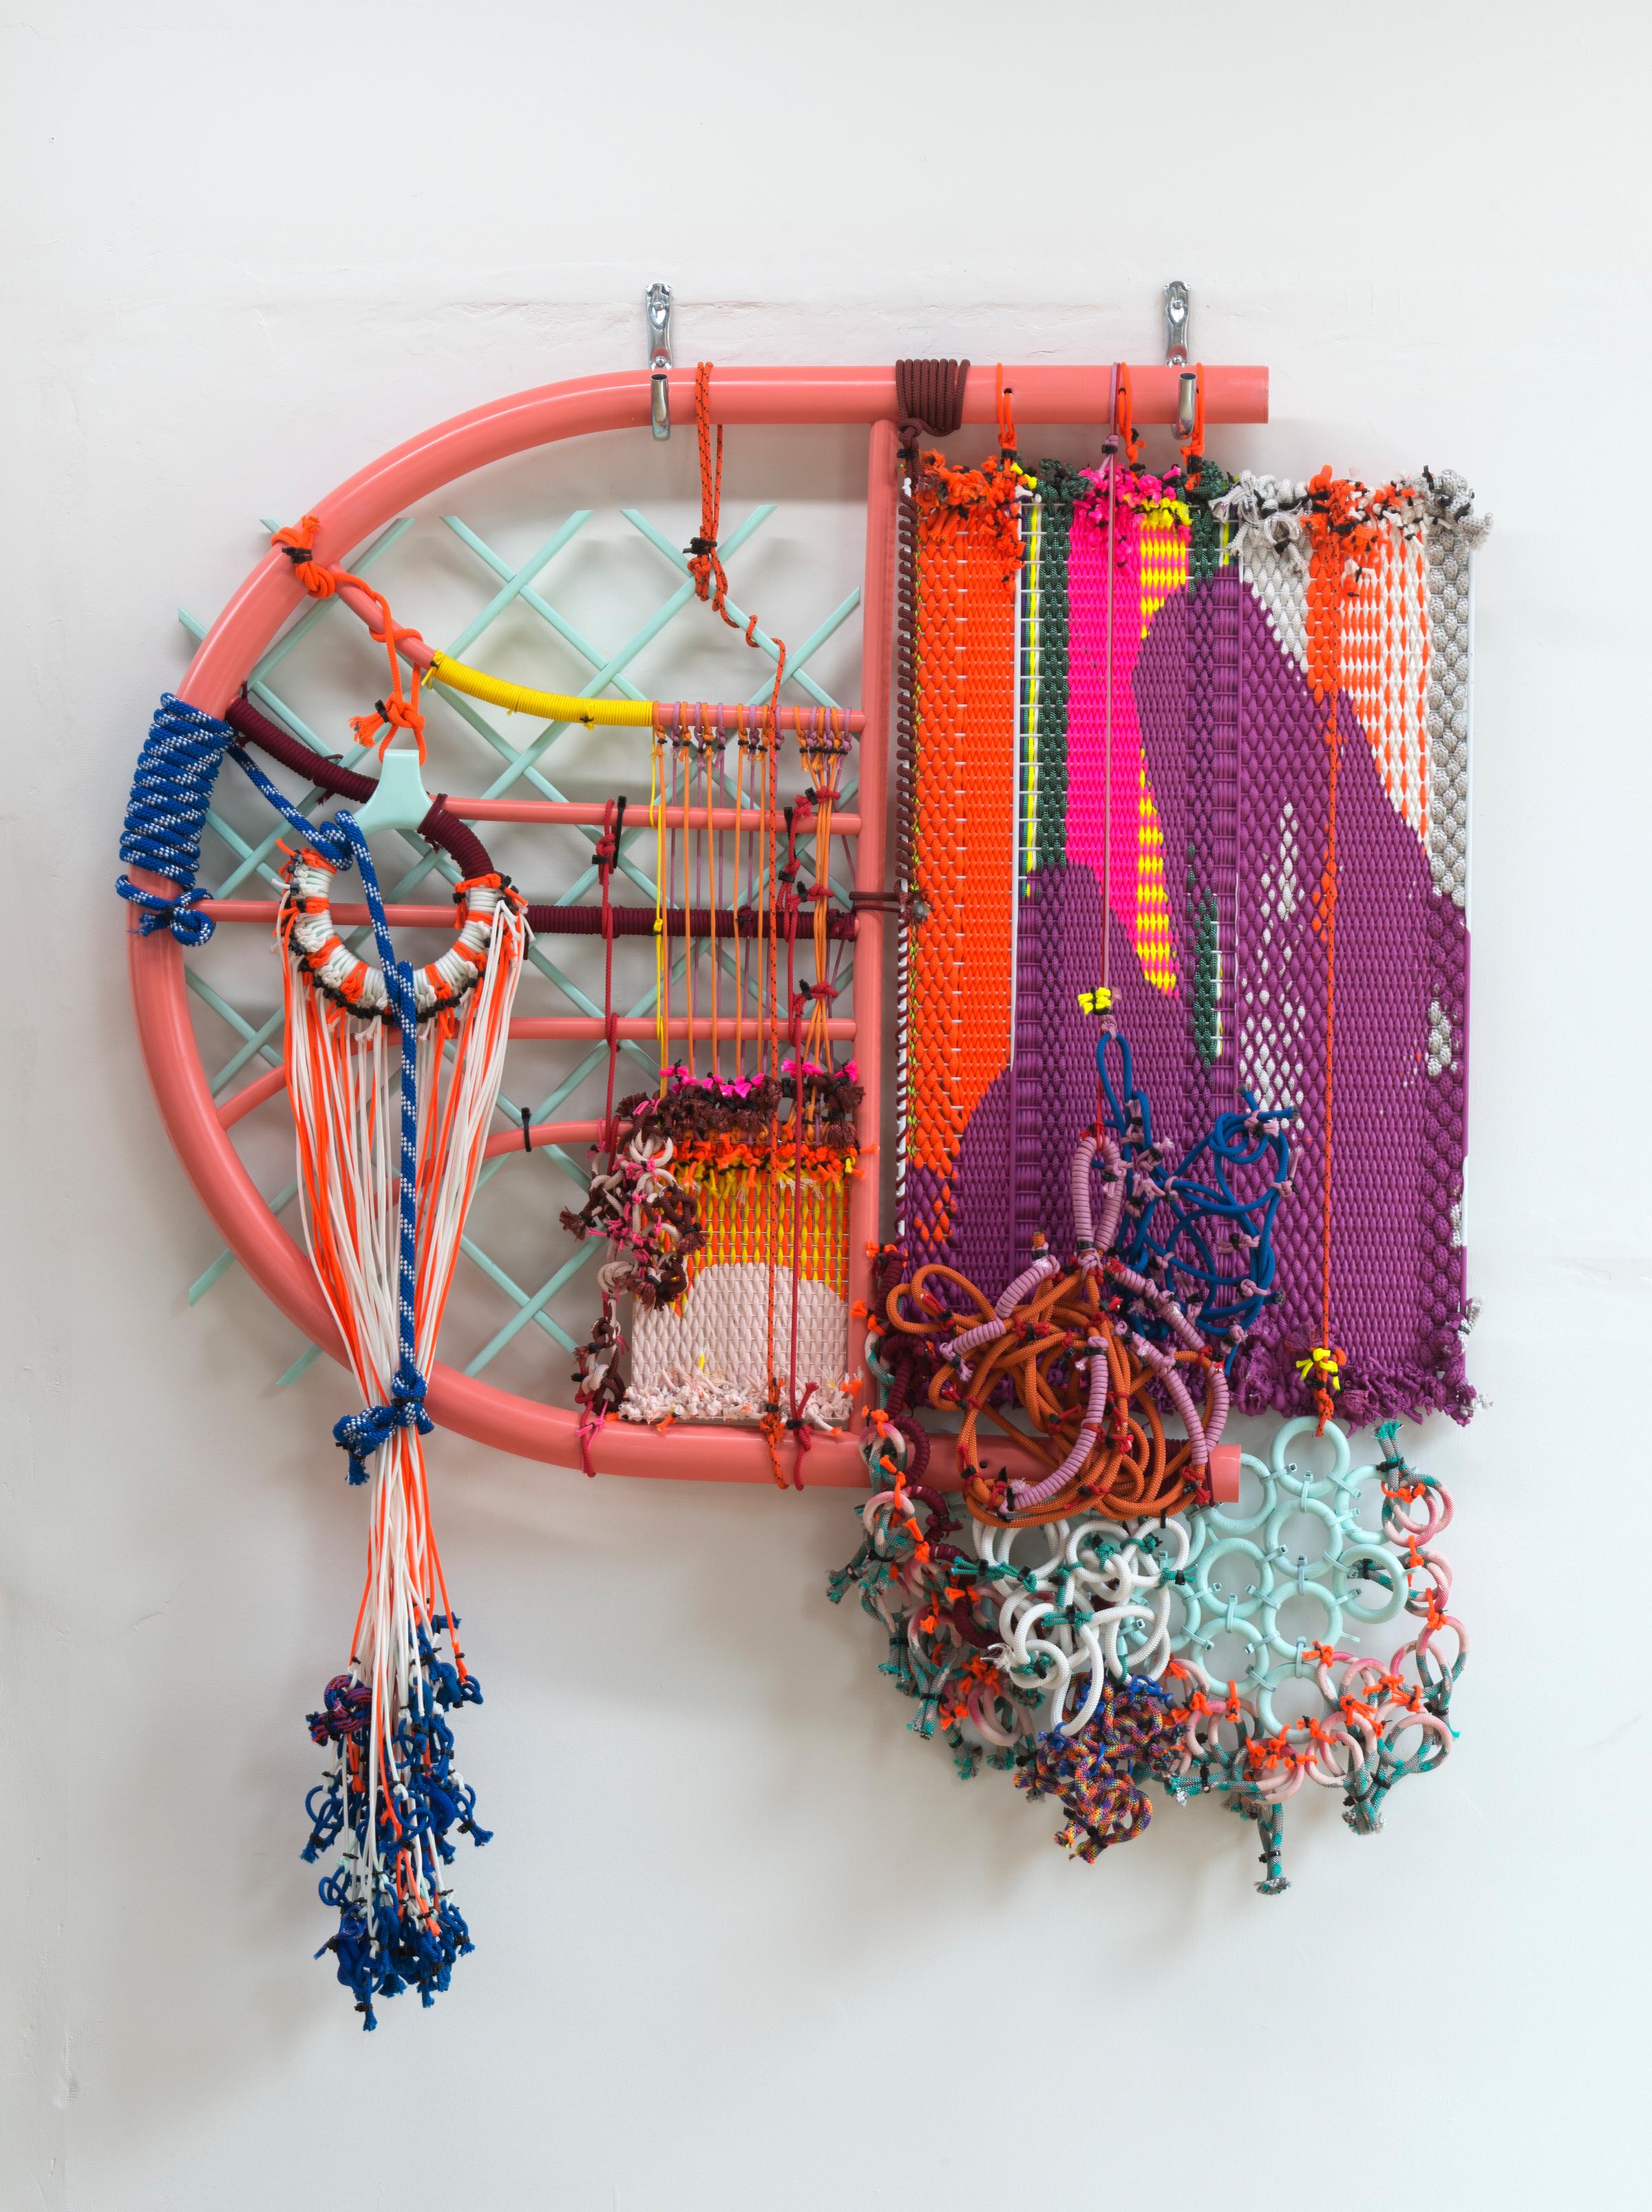 ADORNED OBSOLESCENCE 02 - Sculptural Wall Hanging w/ Found & Repurposed Objects - Mixed Media Art by Liz Miller